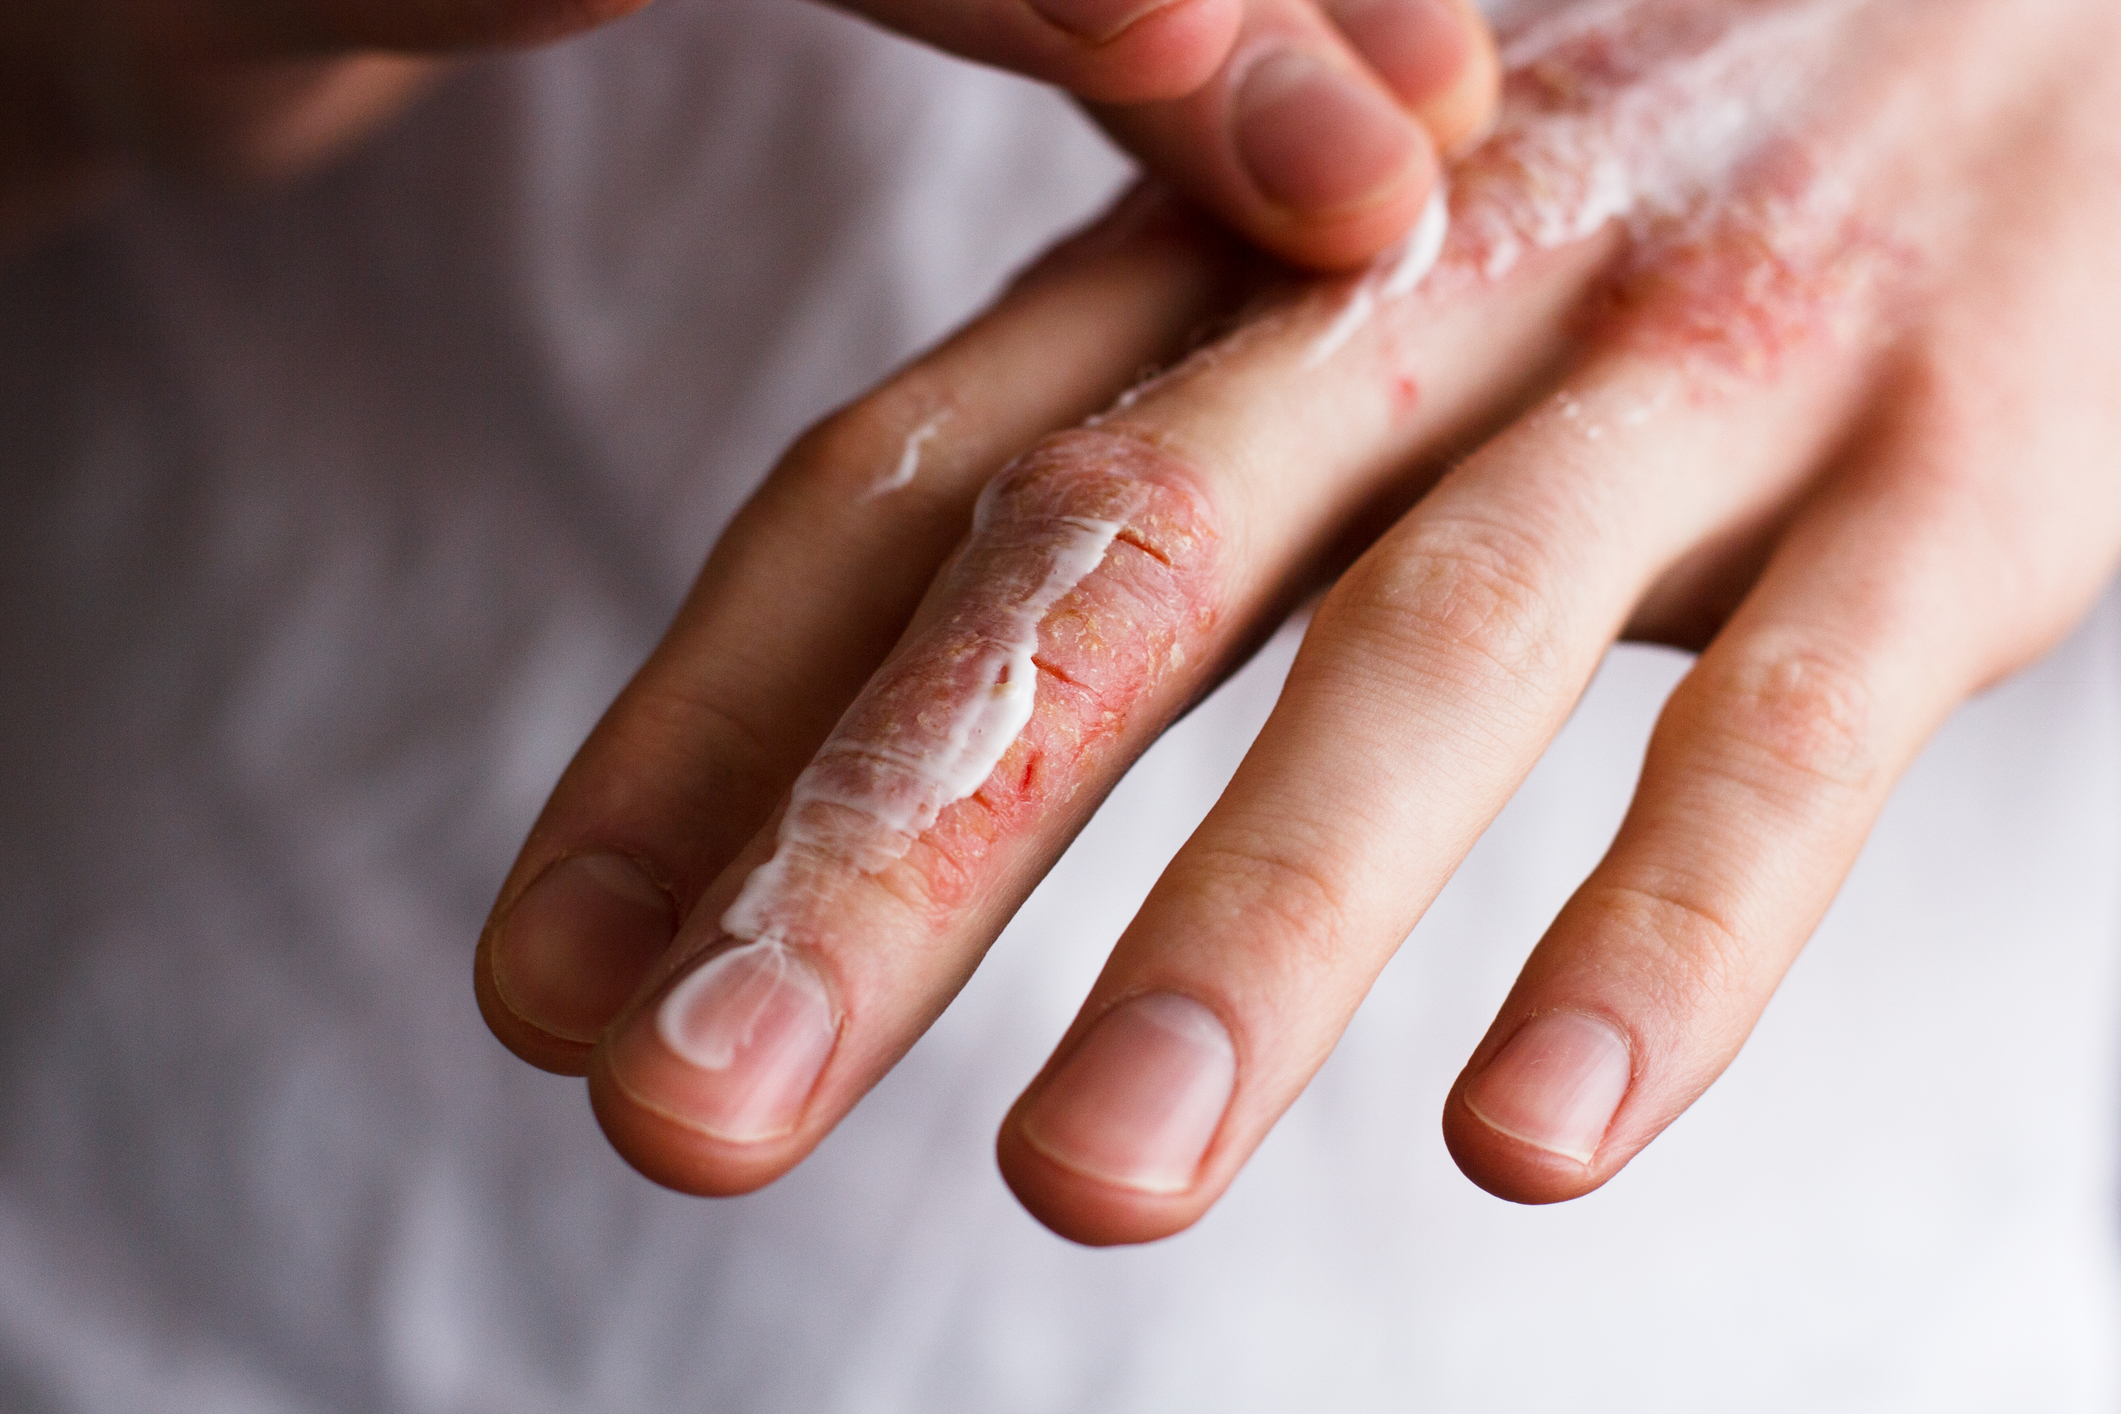 Home treatment for dry cracked hands